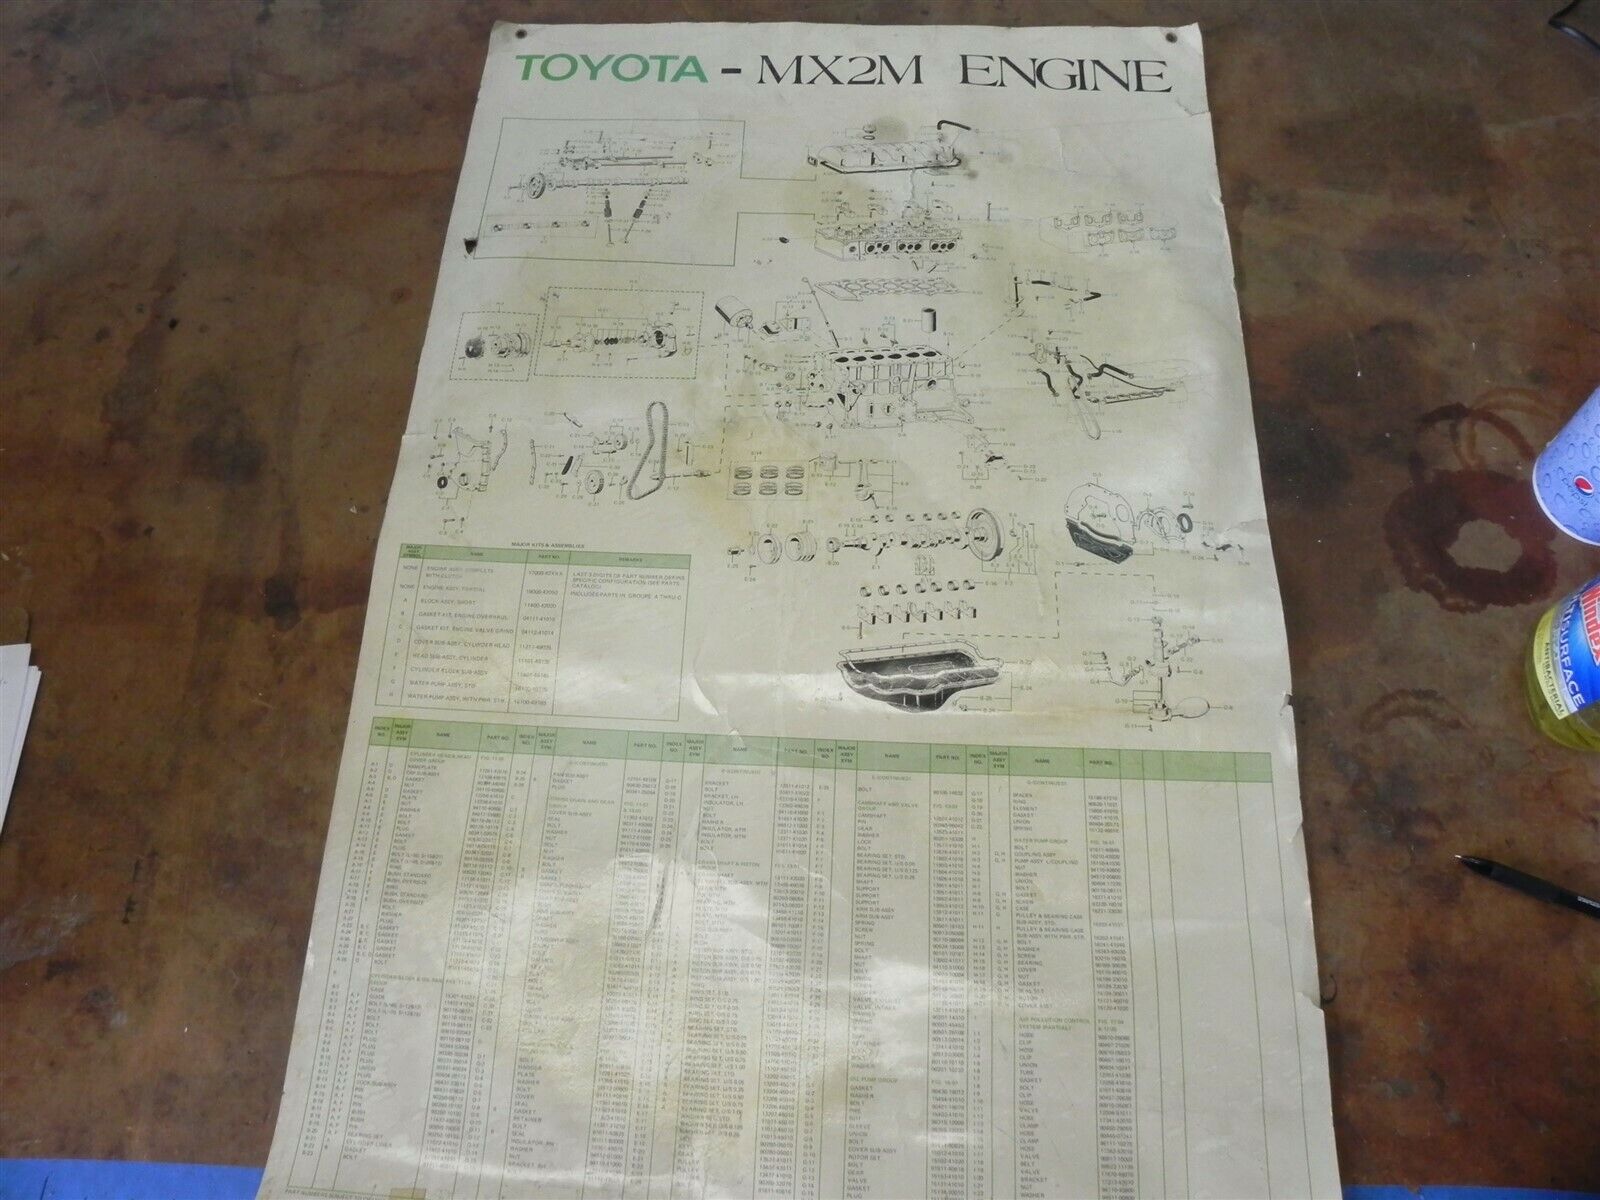 VINTAGE 1970S TOYOTA MX2M ENGINE POSTER W/PART NUMBERS 35 x 23 INCHES RARE